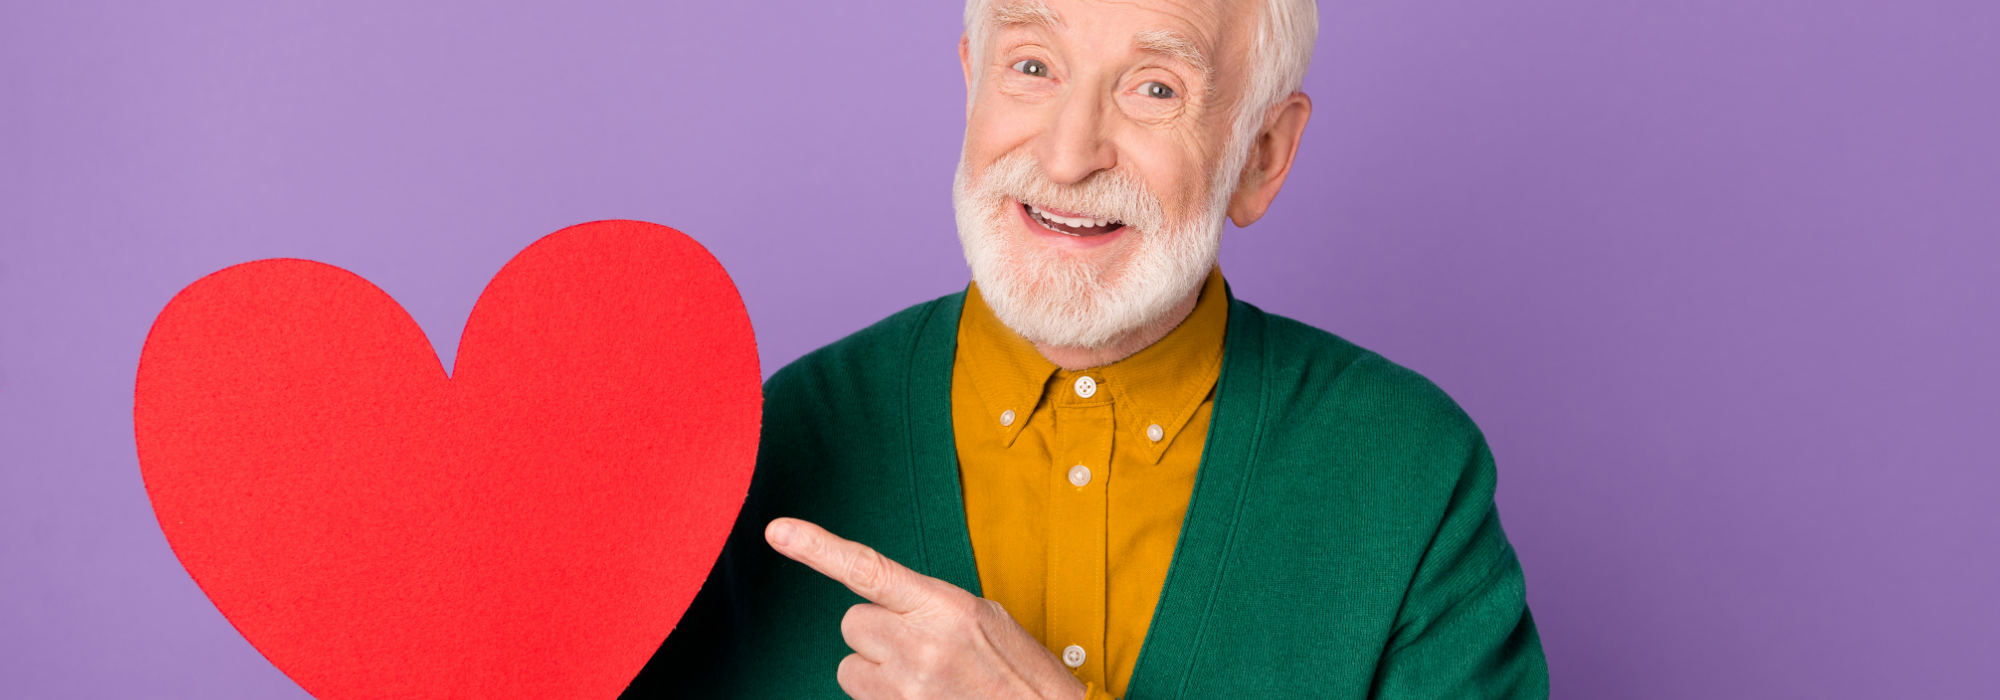 An older man smiling and pointing at a red paper heart